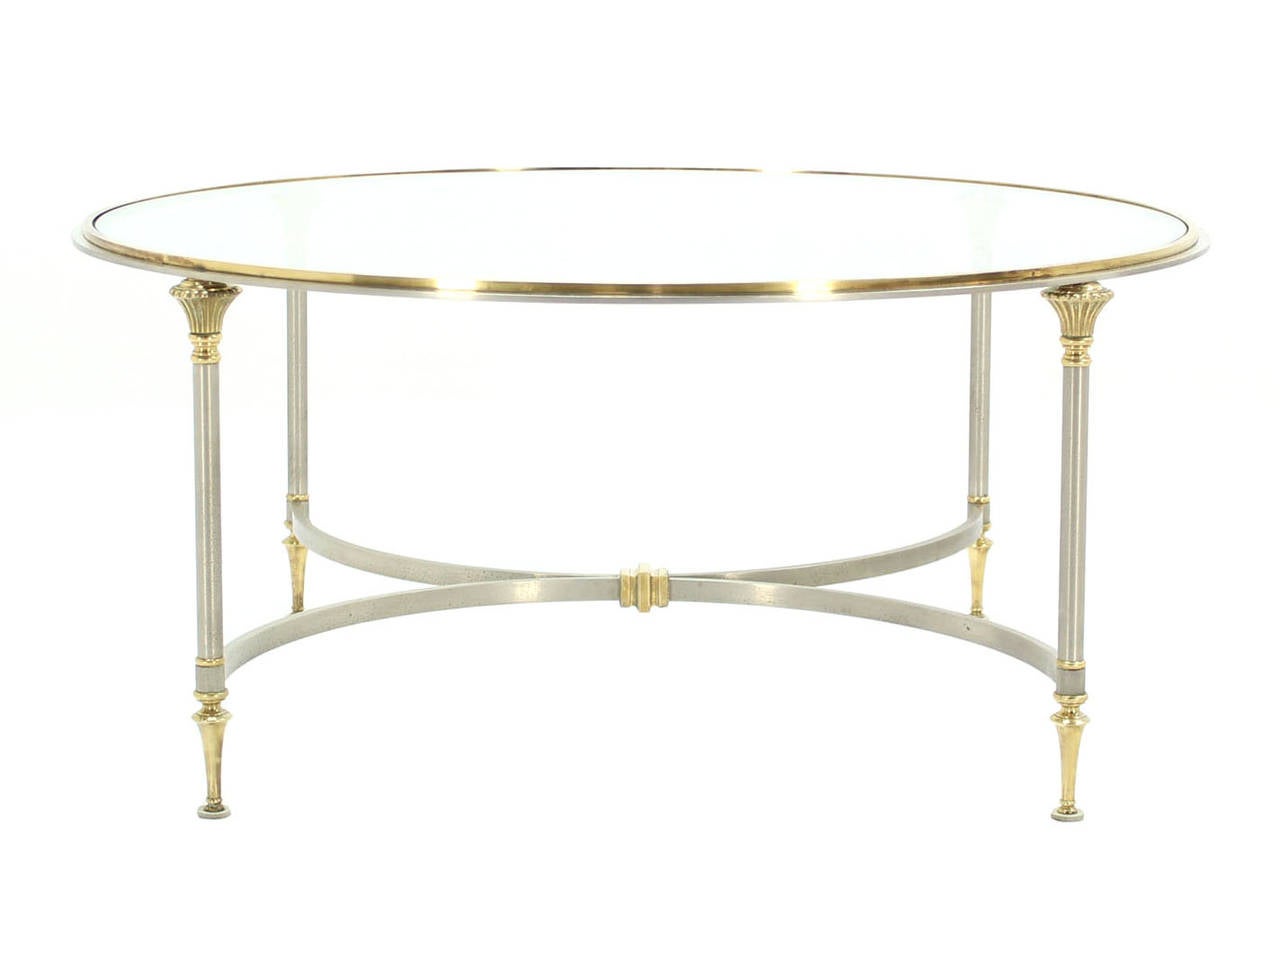 Round coffee table in style of Maison Jansen.